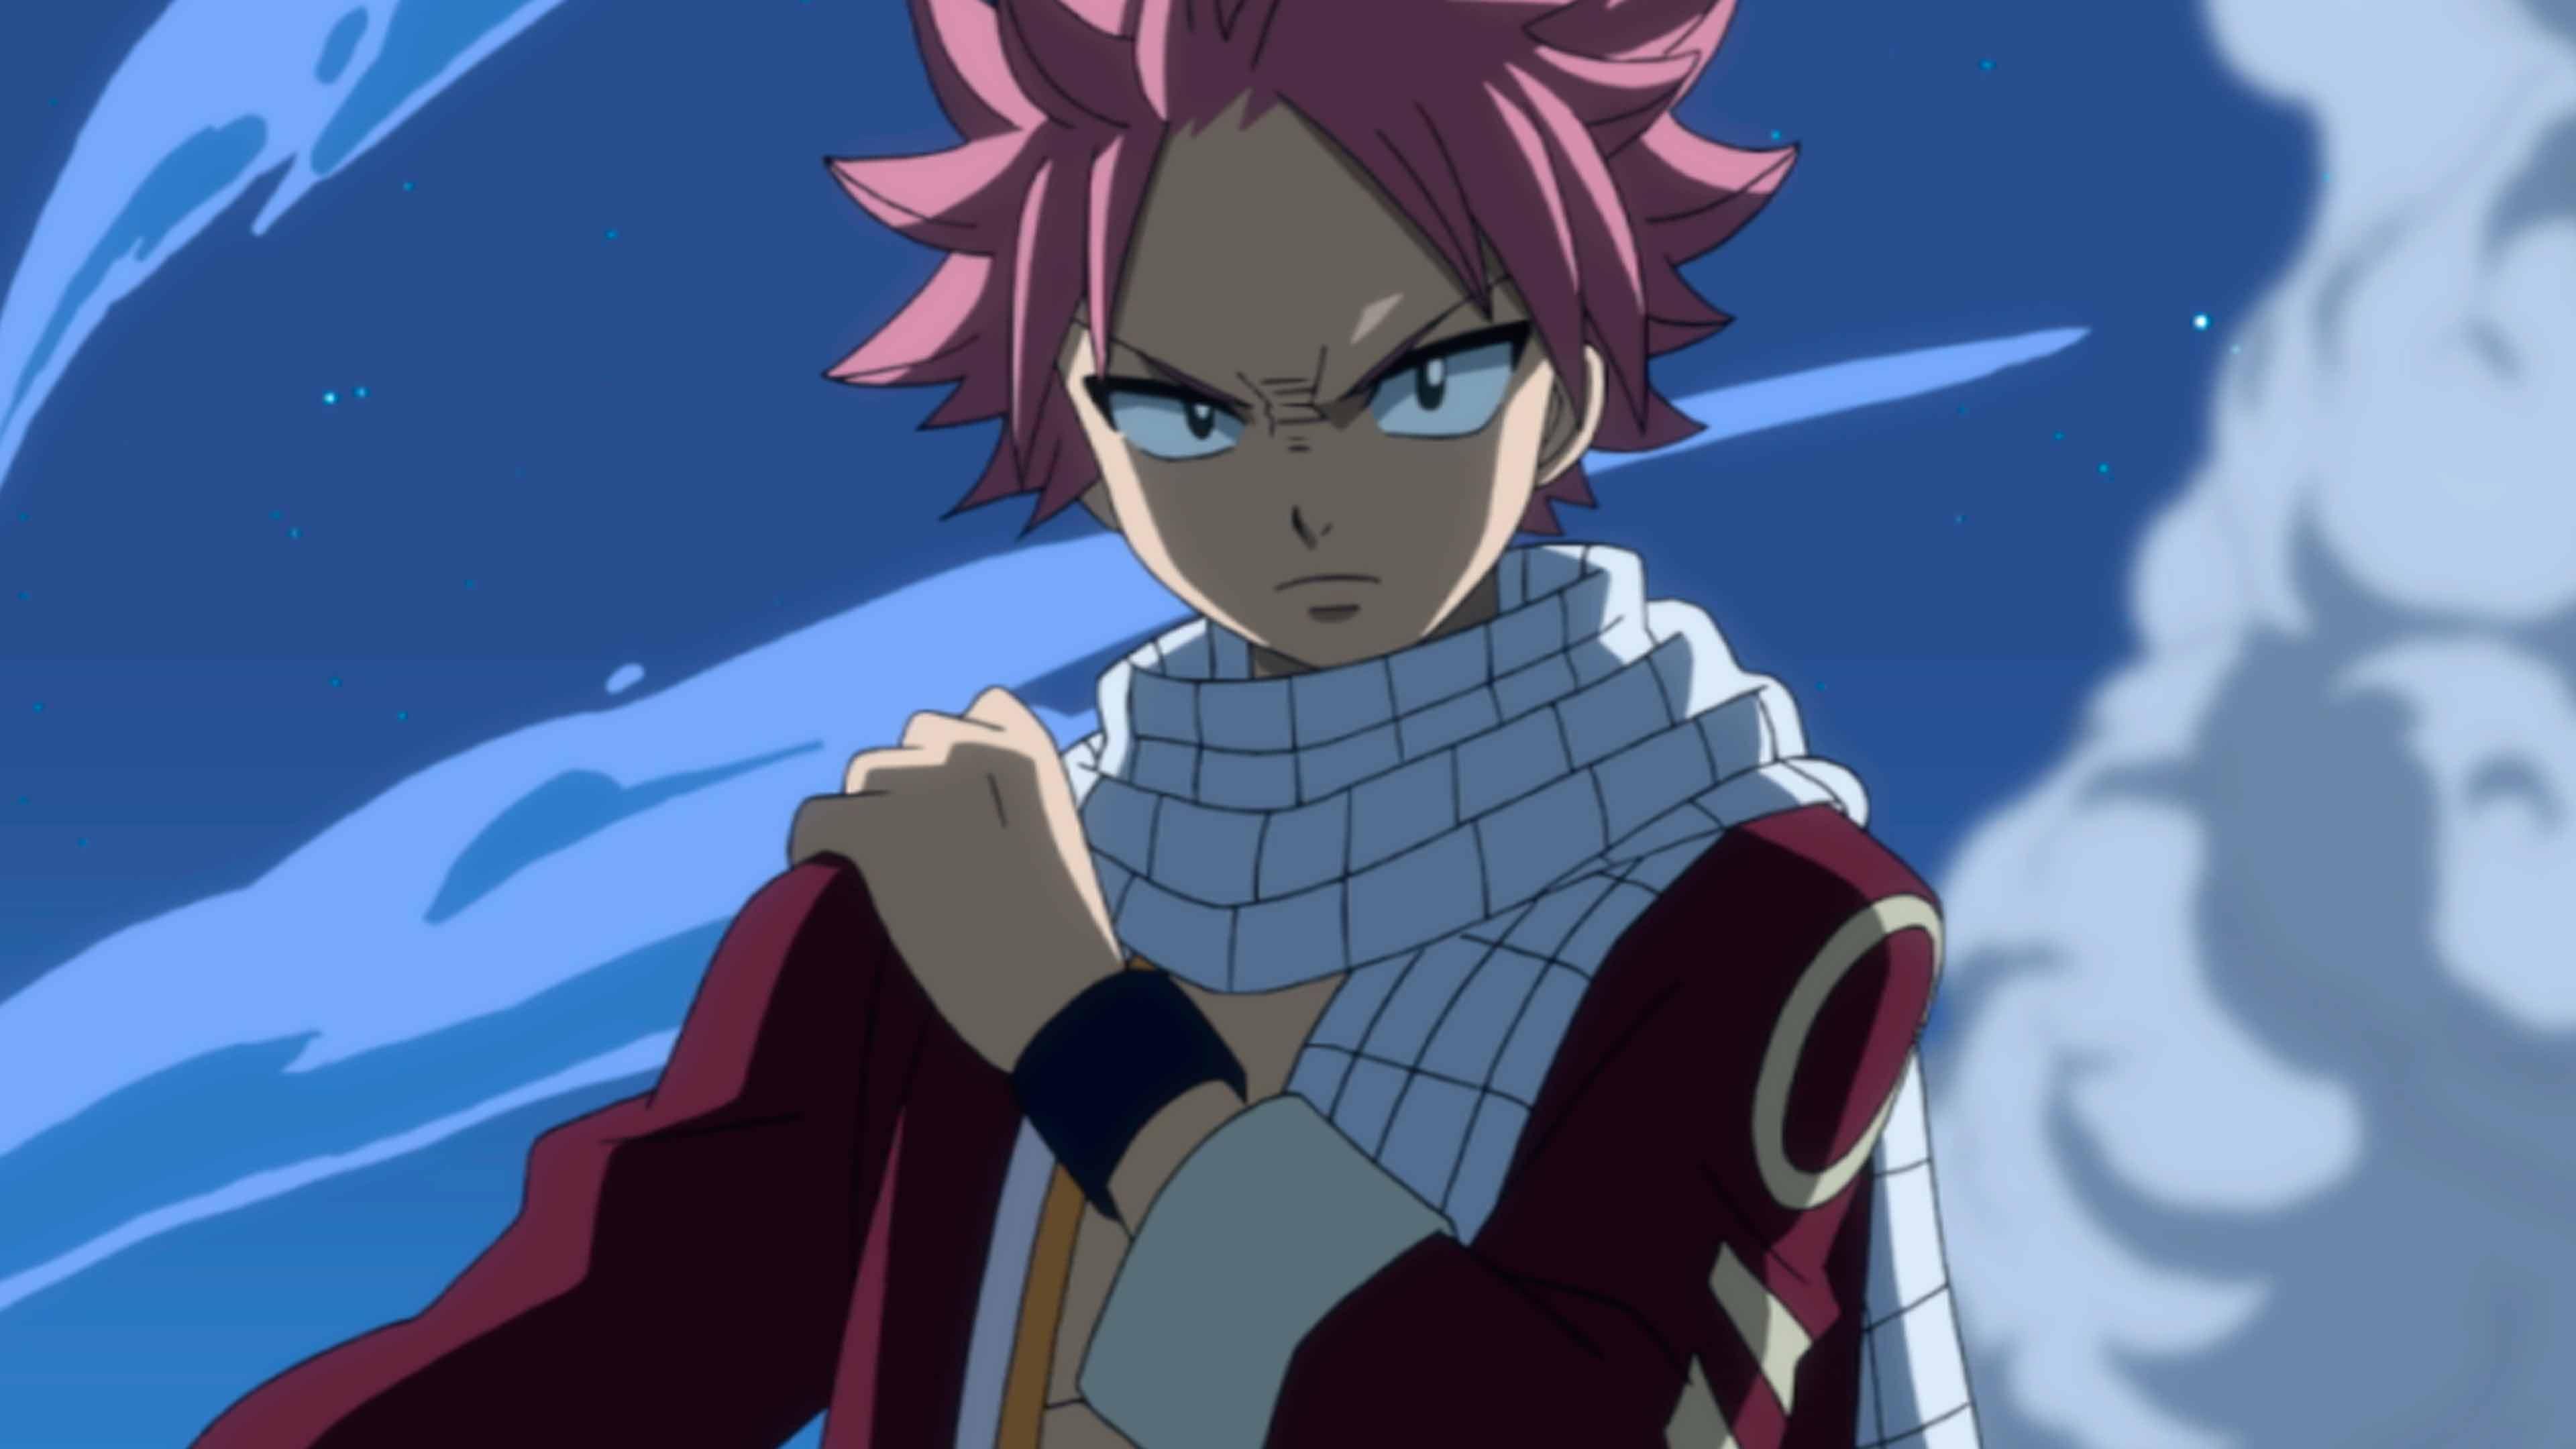 christian housley recommends Fairy Tail Season 1 Episode 1